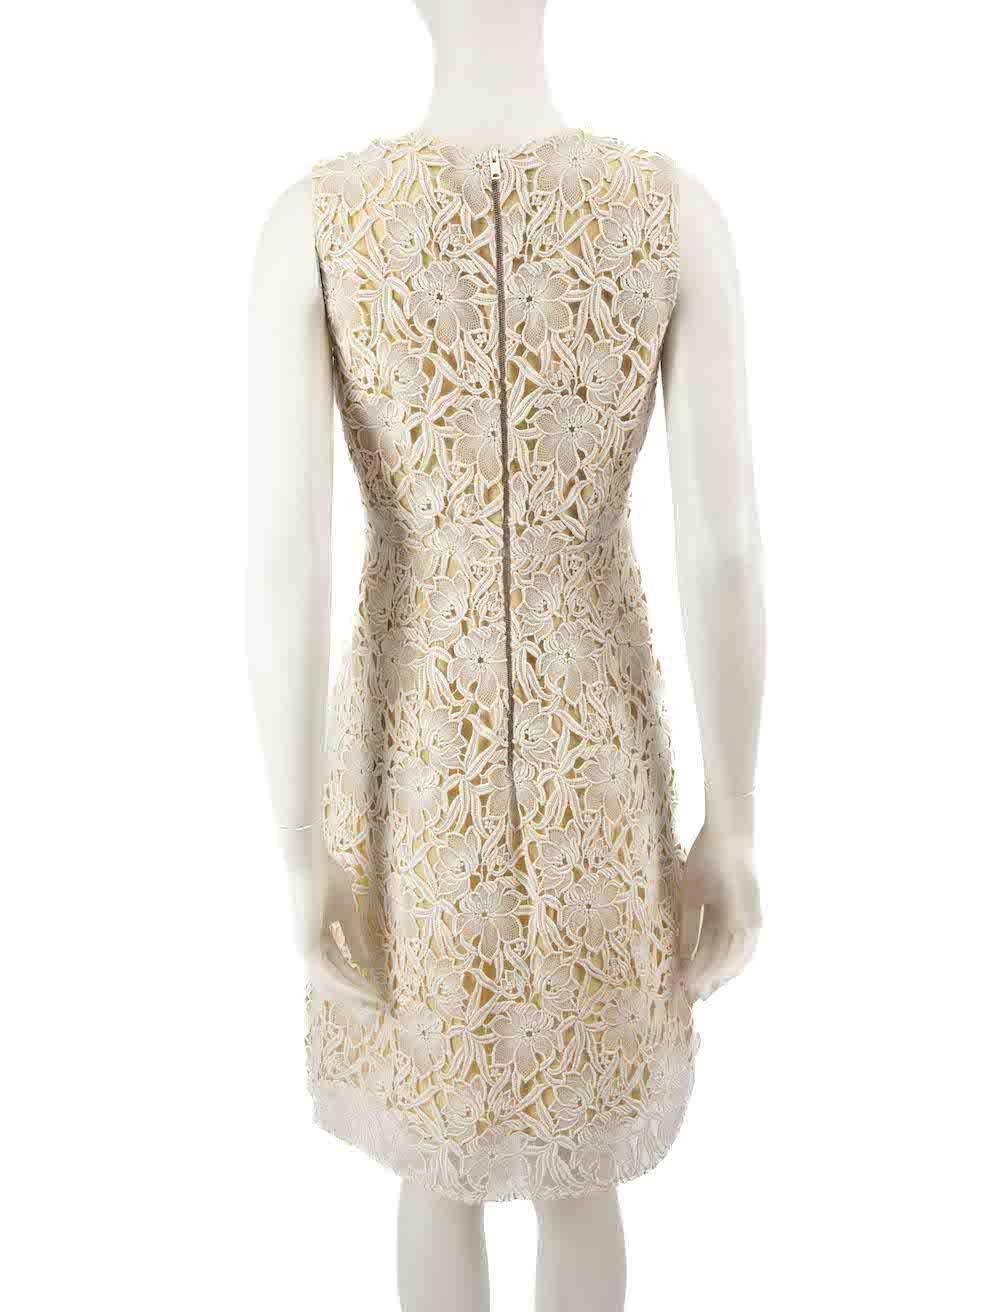 Burberry White Floral Lace Bow Detail Dress Size L In Excellent Condition For Sale In London, GB